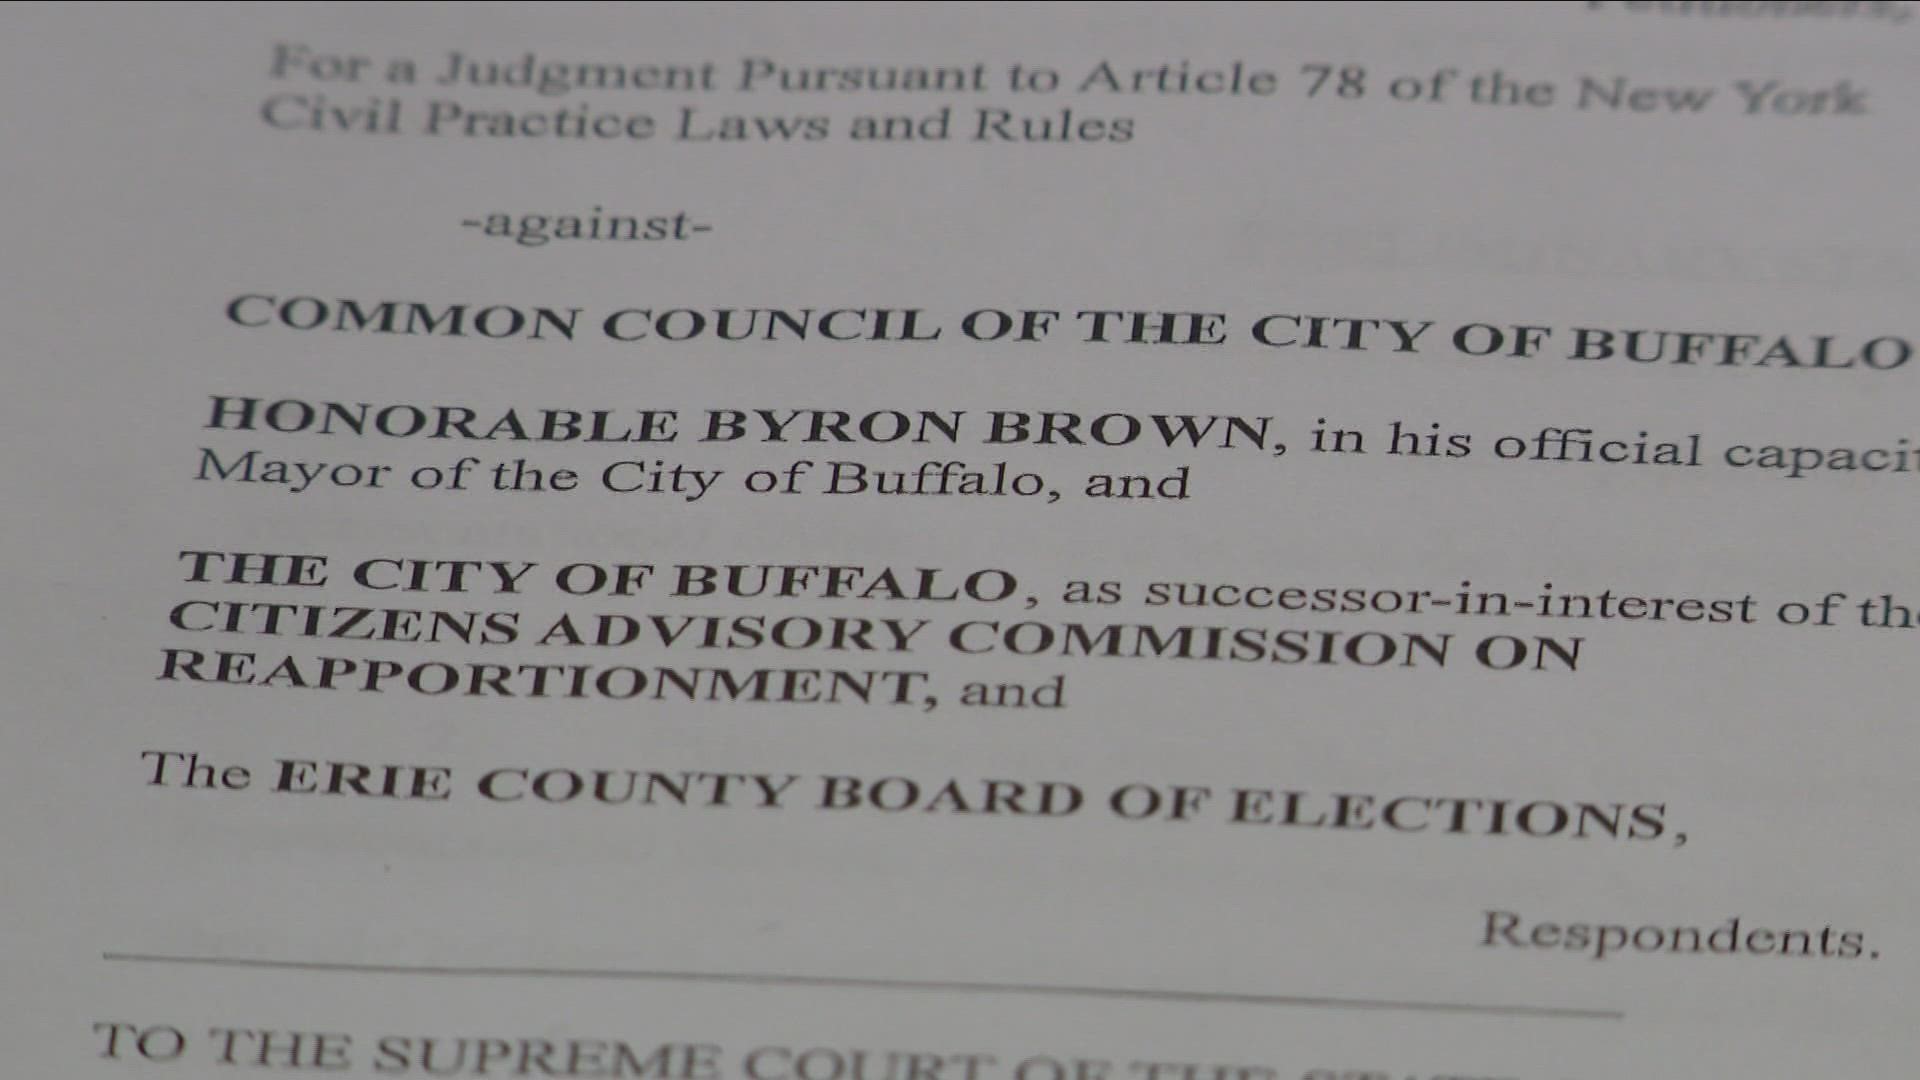 The City of Buffalo amended its response to a lawsuit over the council redistricting process and whether meetings fell under open meetings laws.